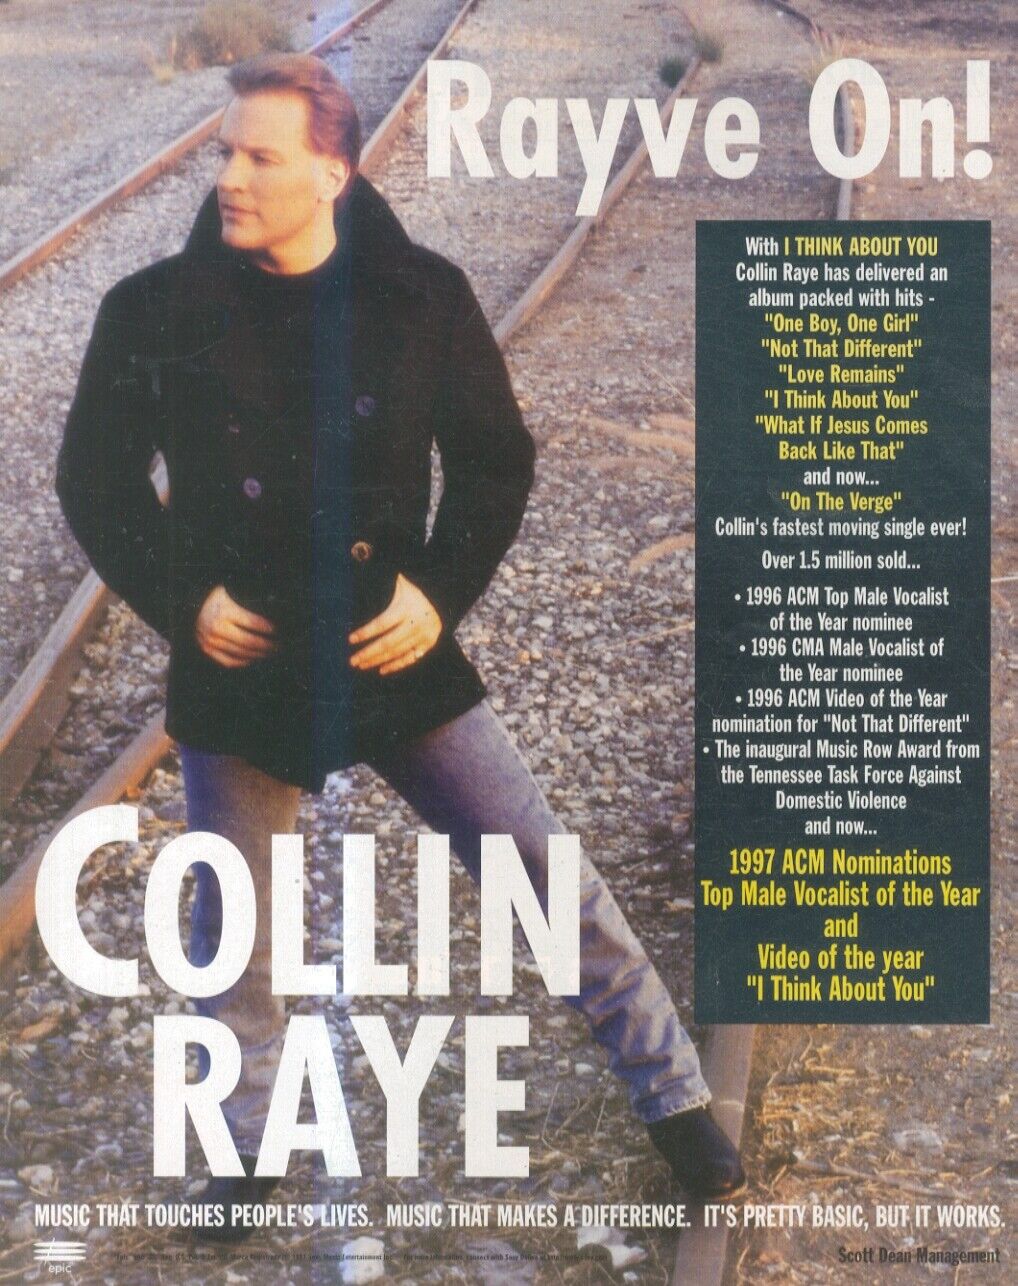 HFBK70 PICTURE/ADVERT 13x11 COLLIN RAYE : I THINK ABOUT YOU